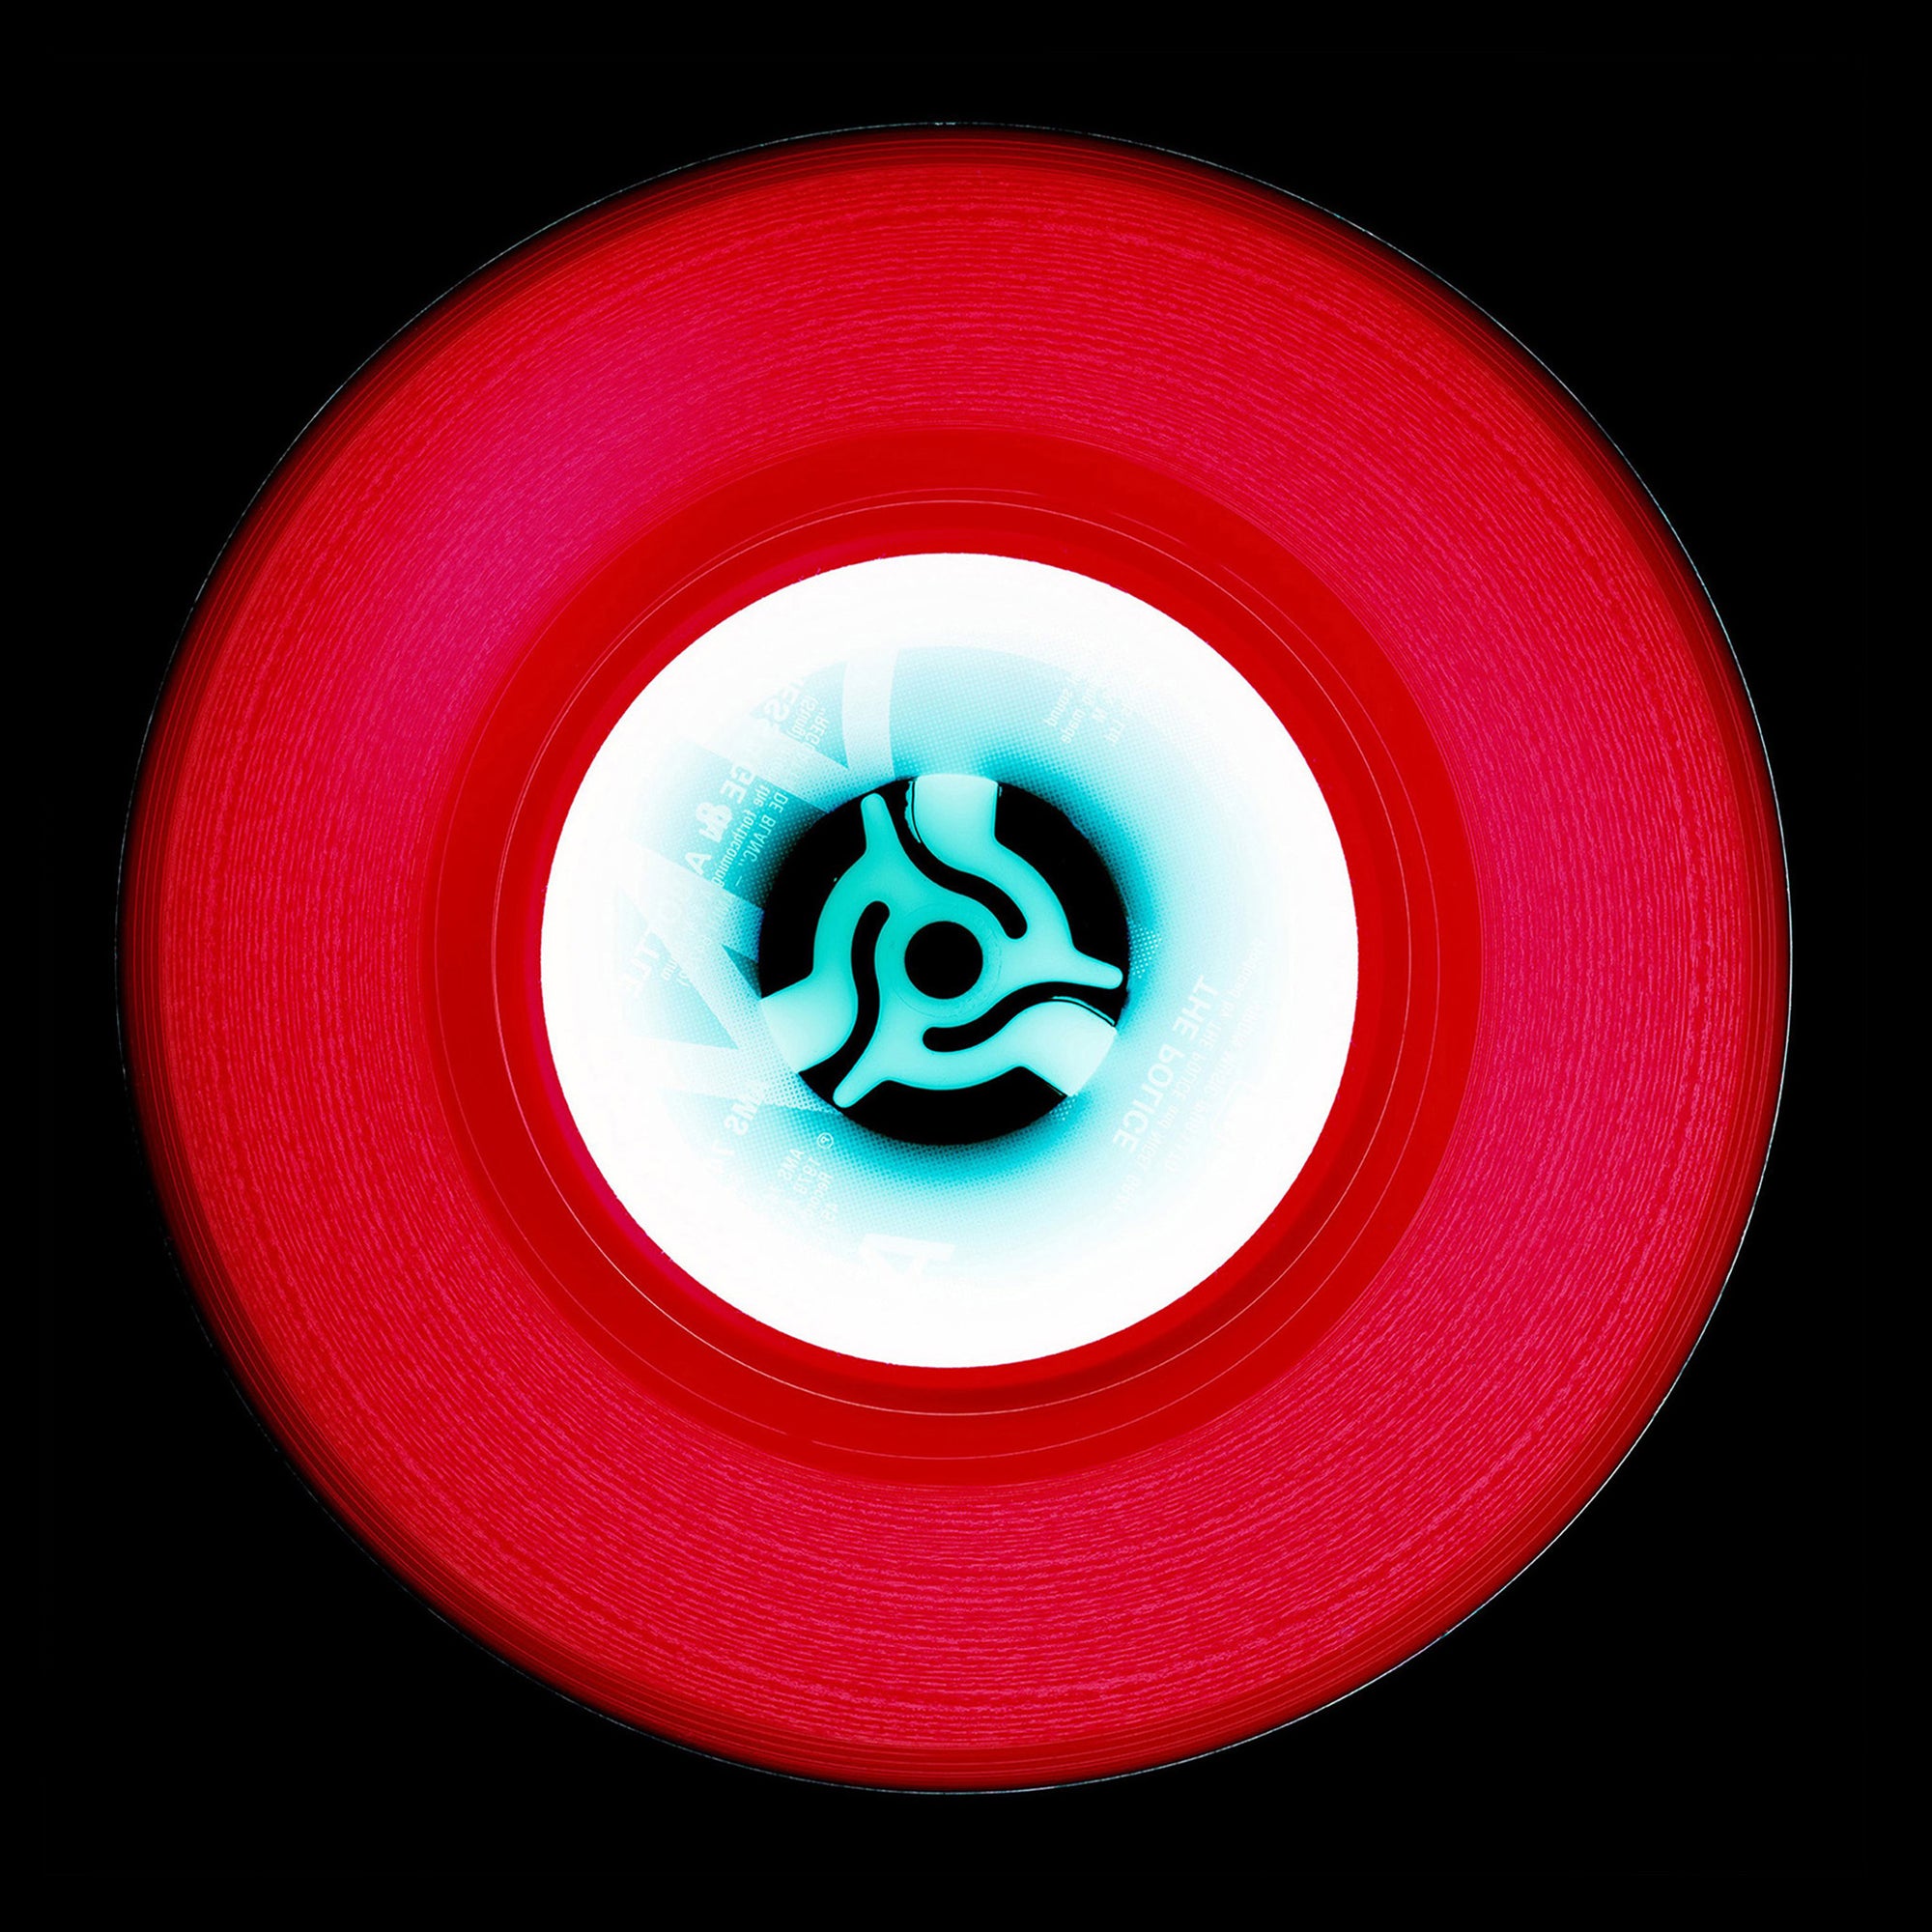 Vinyl Collection 'A' (Cherry Red), 2014. Acclaimed contemporary photographers, Richard Heeps and Natasha Heidler have collaborated to make this beautifully mesmerising collection. A celebration of the vinyl record and analogue technology, which reflects the artists practice within photography. 